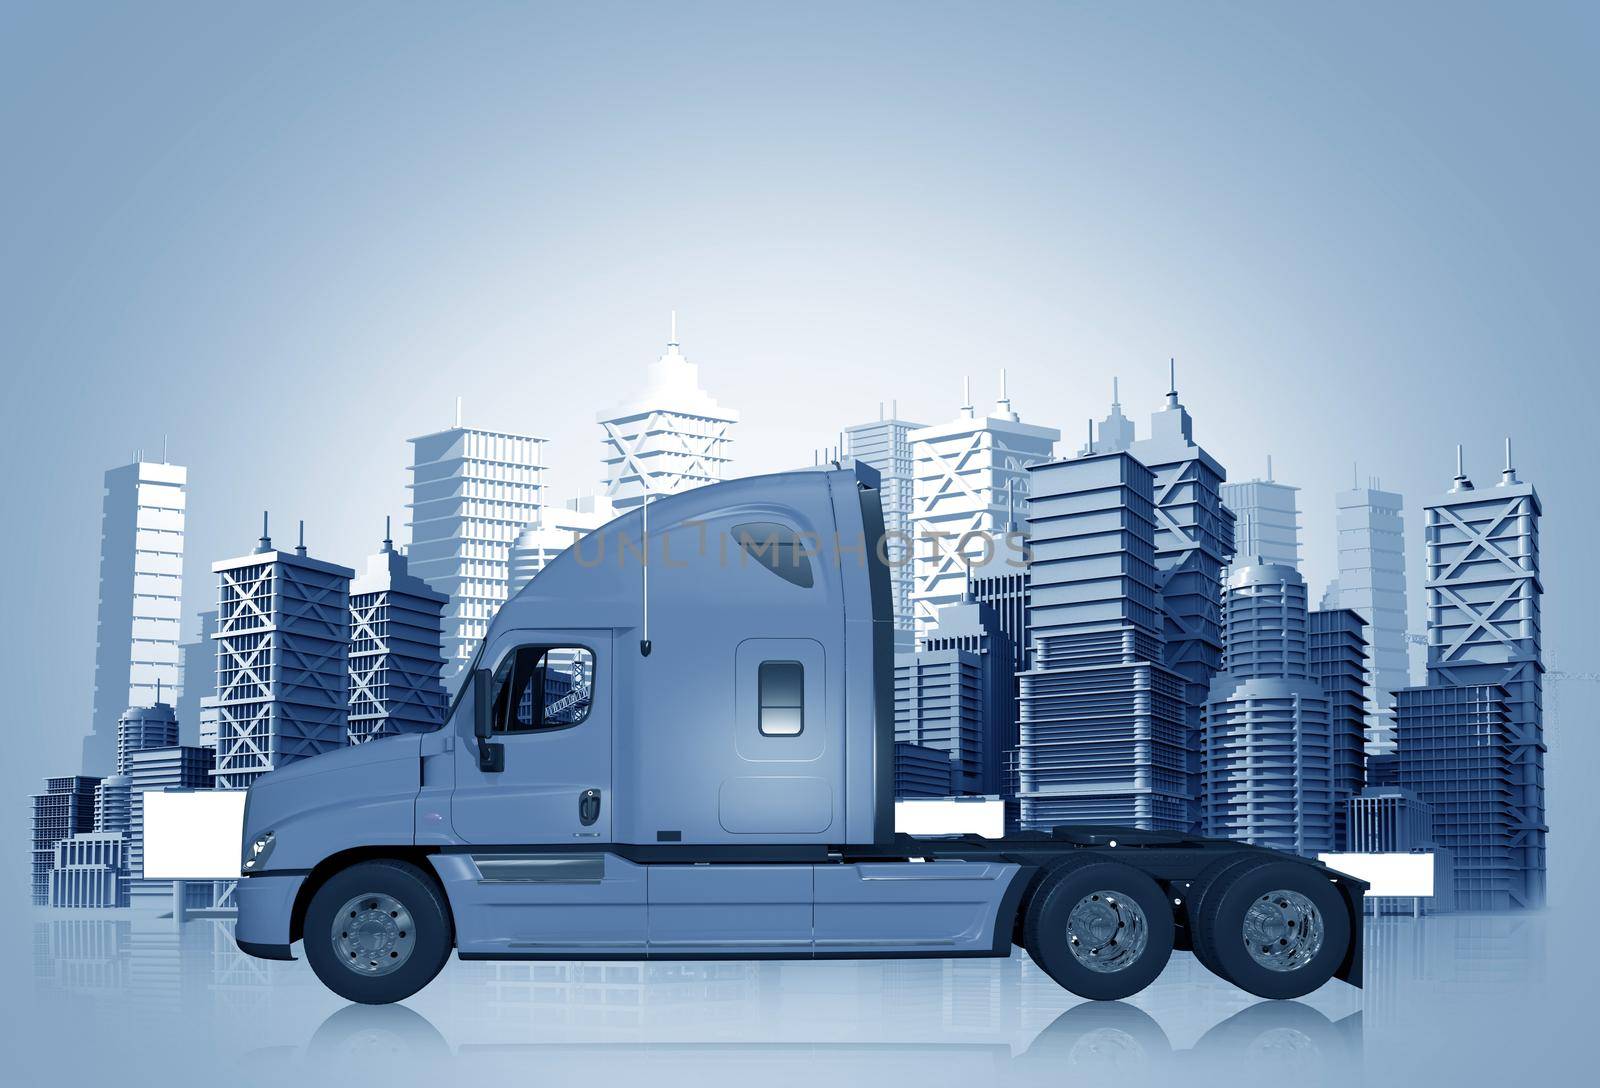 Truck and the City Skyline in Blue Color Tones. Trucking Concept Illustration. by welcomia